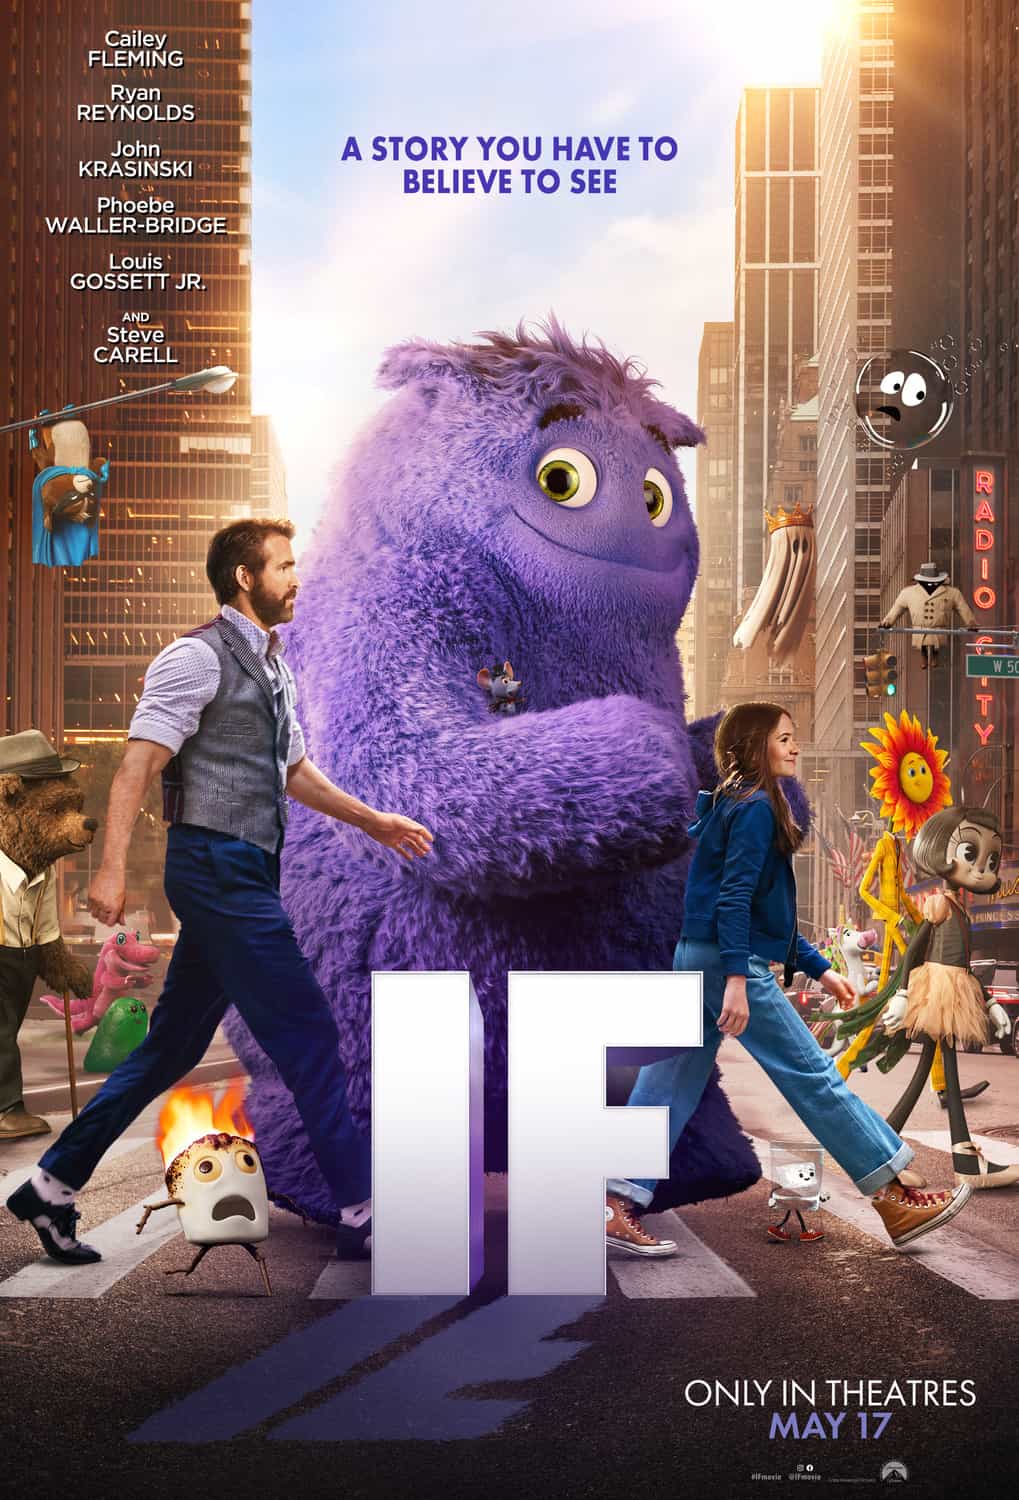 New poster has been released for IF which stars Ryan Reynolds and John Krasinski - movie UK release date 17th May 2024 #if